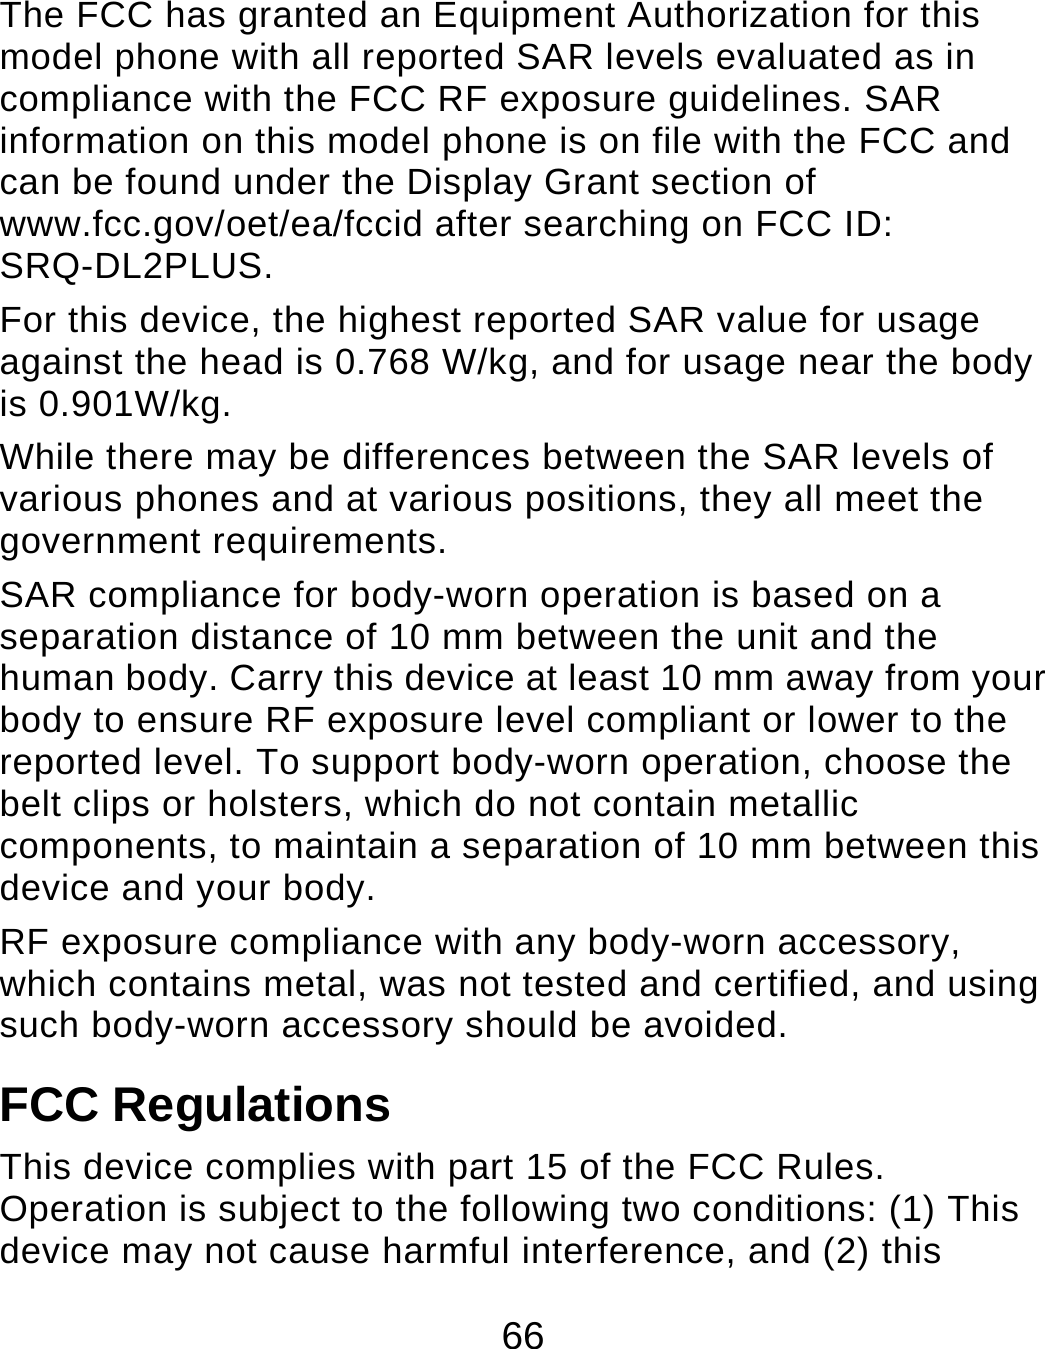 66 The FCC has granted an Equipment Authorization for this model phone with all reported SAR levels evaluated as in compliance with the FCC RF exposure guidelines. SAR information on this model phone is on file with the FCC and can be found under the Display Grant section of www.fcc.gov/oet/ea/fccid after searching on FCC ID: SRQ-DL2PLUS. For this device, the highest reported SAR value for usage against the head is 0.768 W/kg, and for usage near the body is 0.901W/kg. While there may be differences between the SAR levels of various phones and at various positions, they all meet the government requirements. SAR compliance for body-worn operation is based on a separation distance of 10 mm between the unit and the human body. Carry this device at least 10 mm away from your body to ensure RF exposure level compliant or lower to the reported level. To support body-worn operation, choose the belt clips or holsters, which do not contain metallic components, to maintain a separation of 10 mm between this device and your body.   RF exposure compliance with any body-worn accessory, which contains metal, was not tested and certified, and using such body-worn accessory should be avoided. FCC Regulations This device complies with part 15 of the FCC Rules. Operation is subject to the following two conditions: (1) This device may not cause harmful interference, and (2) this 